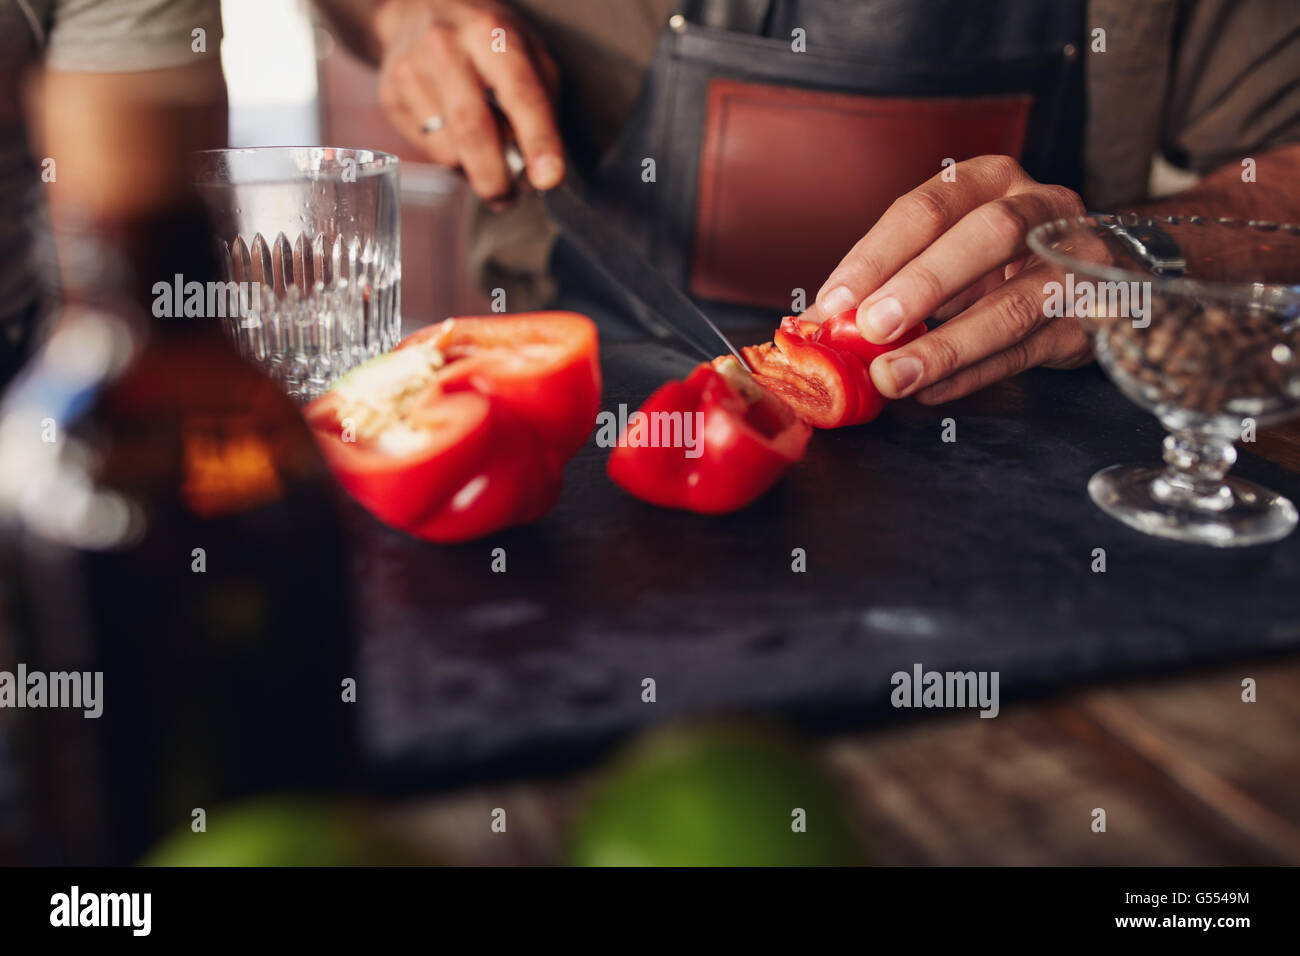 Close up shot of bartender hands chopping red bell pepper on the cutting board. Experimenting with new cocktail ideas. Stock Photo